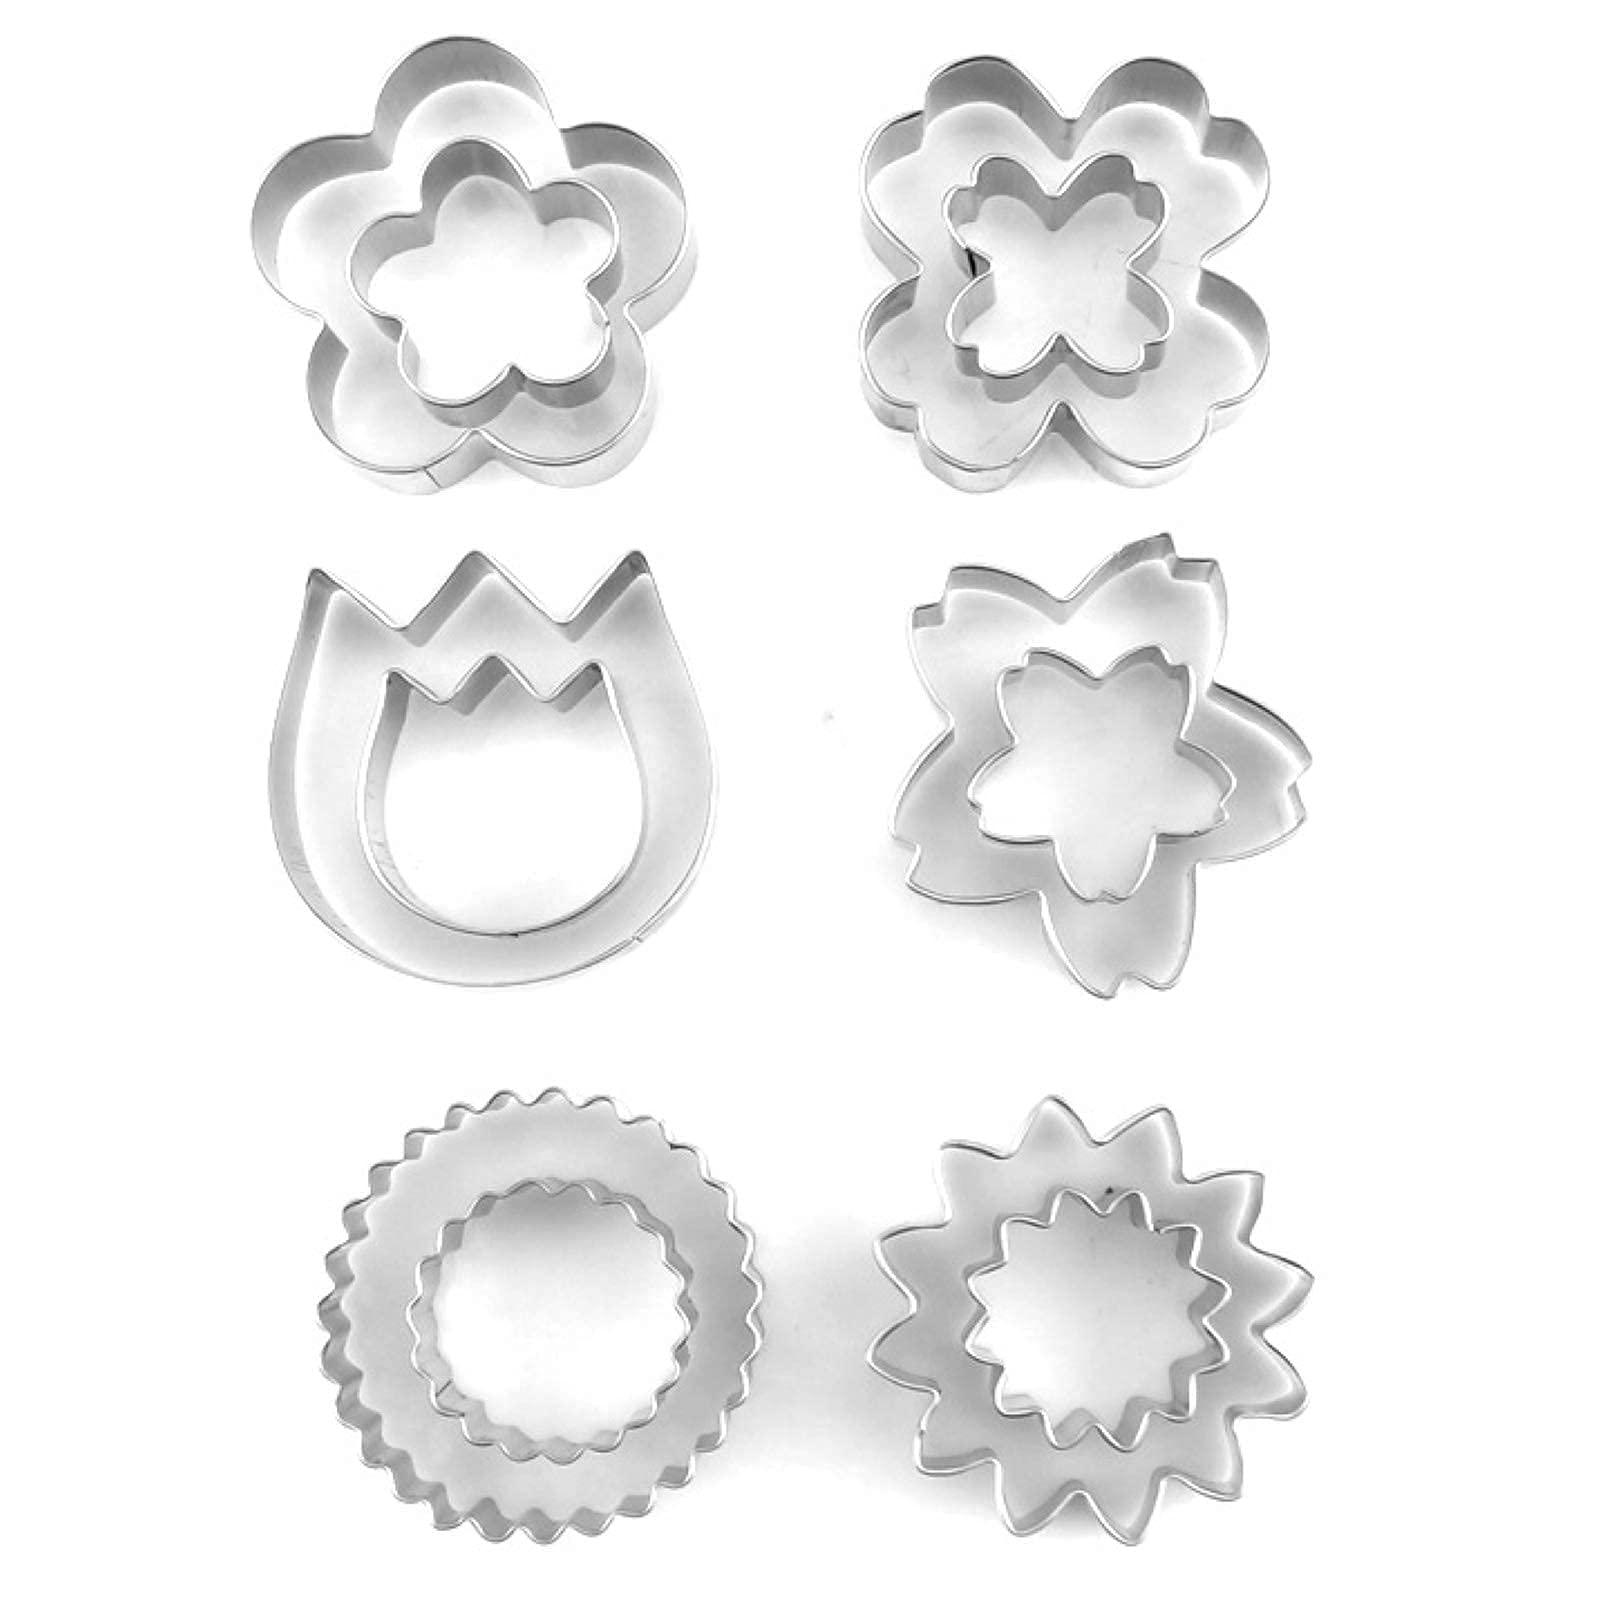 Flowers Cookie Cutter Set -12 Pieces - Plum Blossoms, Clover, Tulip, Cherry Blossoms, Sawtooth Circle, Sunflower Biscuit Fondant Cutters Stainless Steel - CookCave